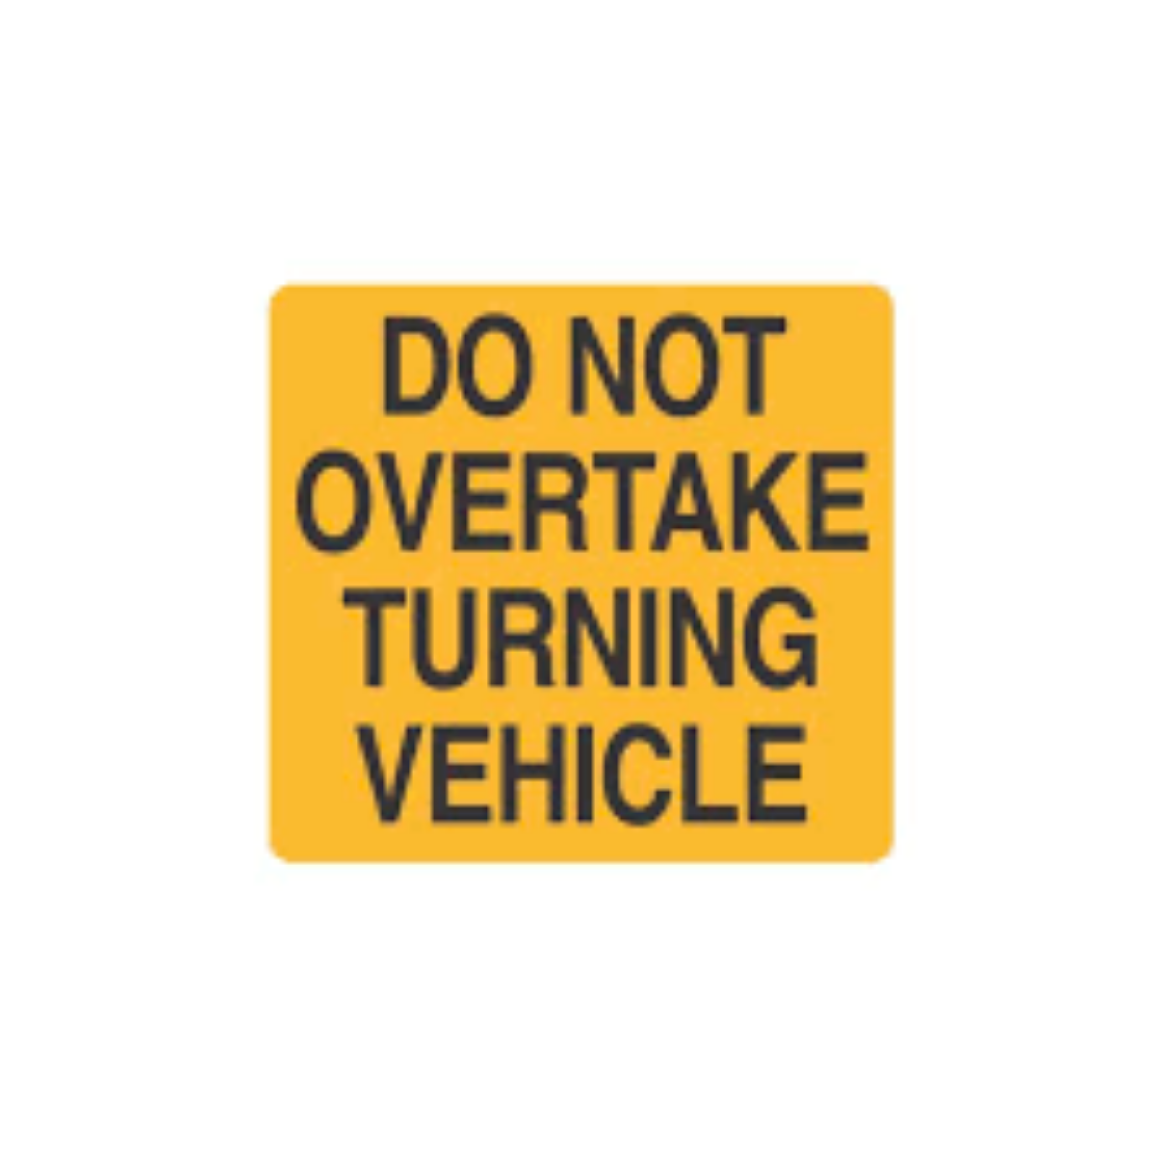 Picture of Rear Markers - Class 400 (VSB12) DO NOT OVERTAKE TURNING VEHICLE - LEFT USE ONLY 300 x 300mm Aluminium
Category 33L Plate